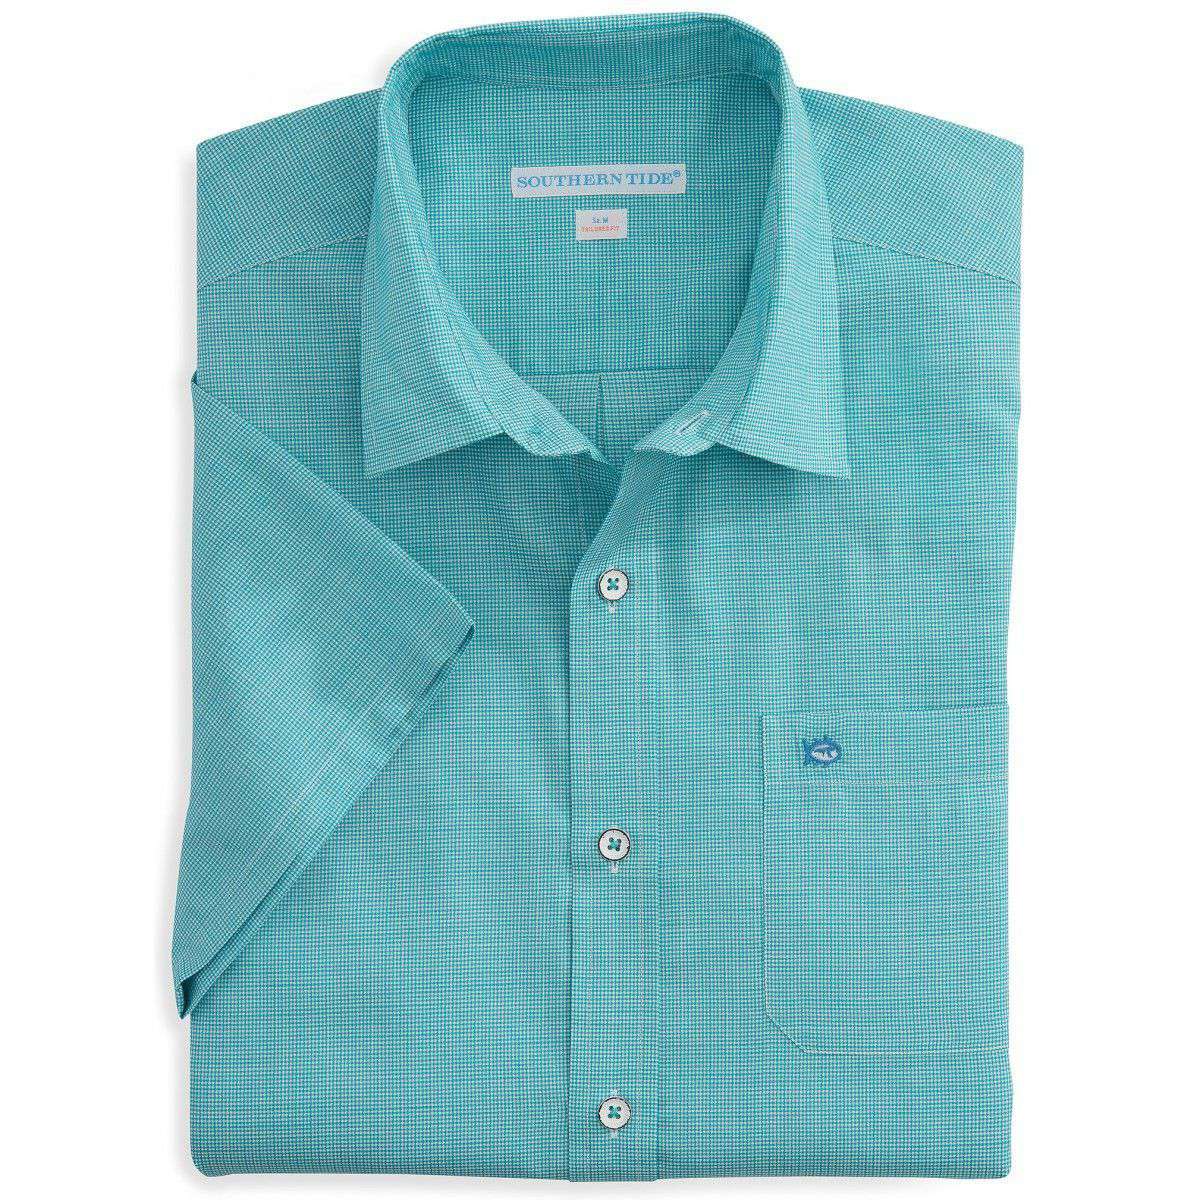 Tailored Short Sleeve Cast Off Check Sport Shirt in Tidal Wave Green by Southern Tide - Country Club Prep